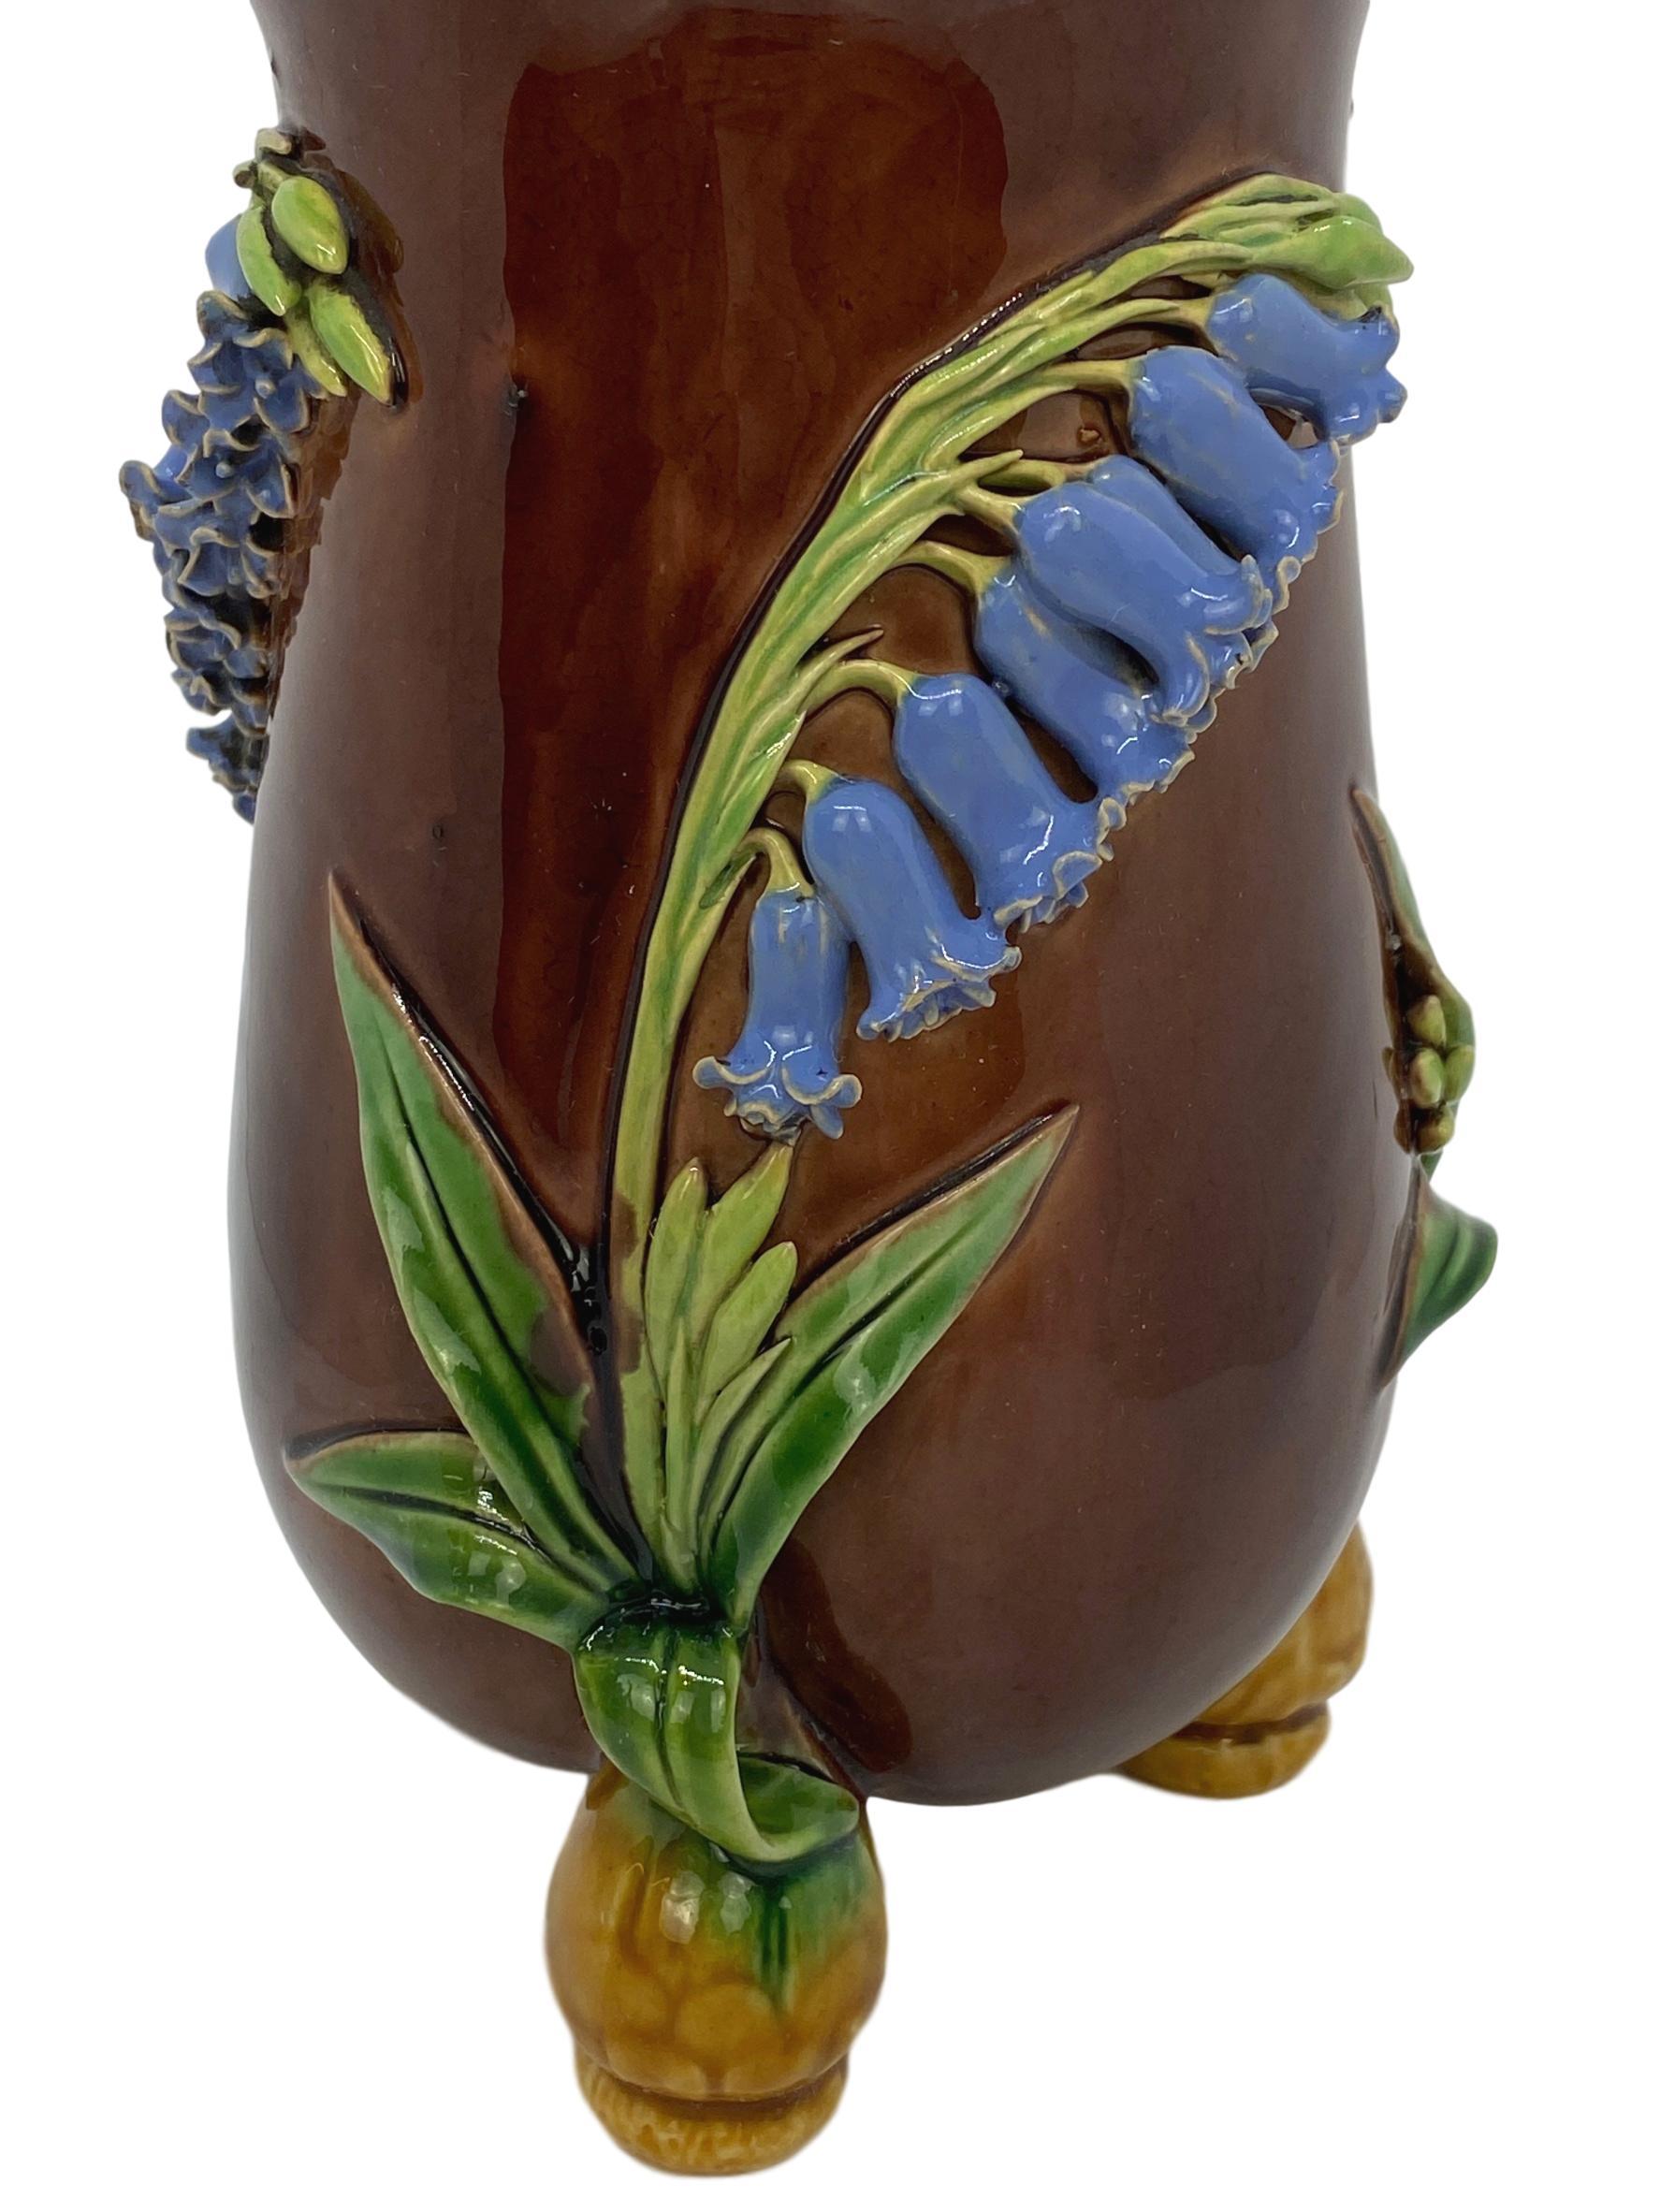 Molded Minton Majolica Bluebells Vase in Periwinkle Blue, English, Dated 1853